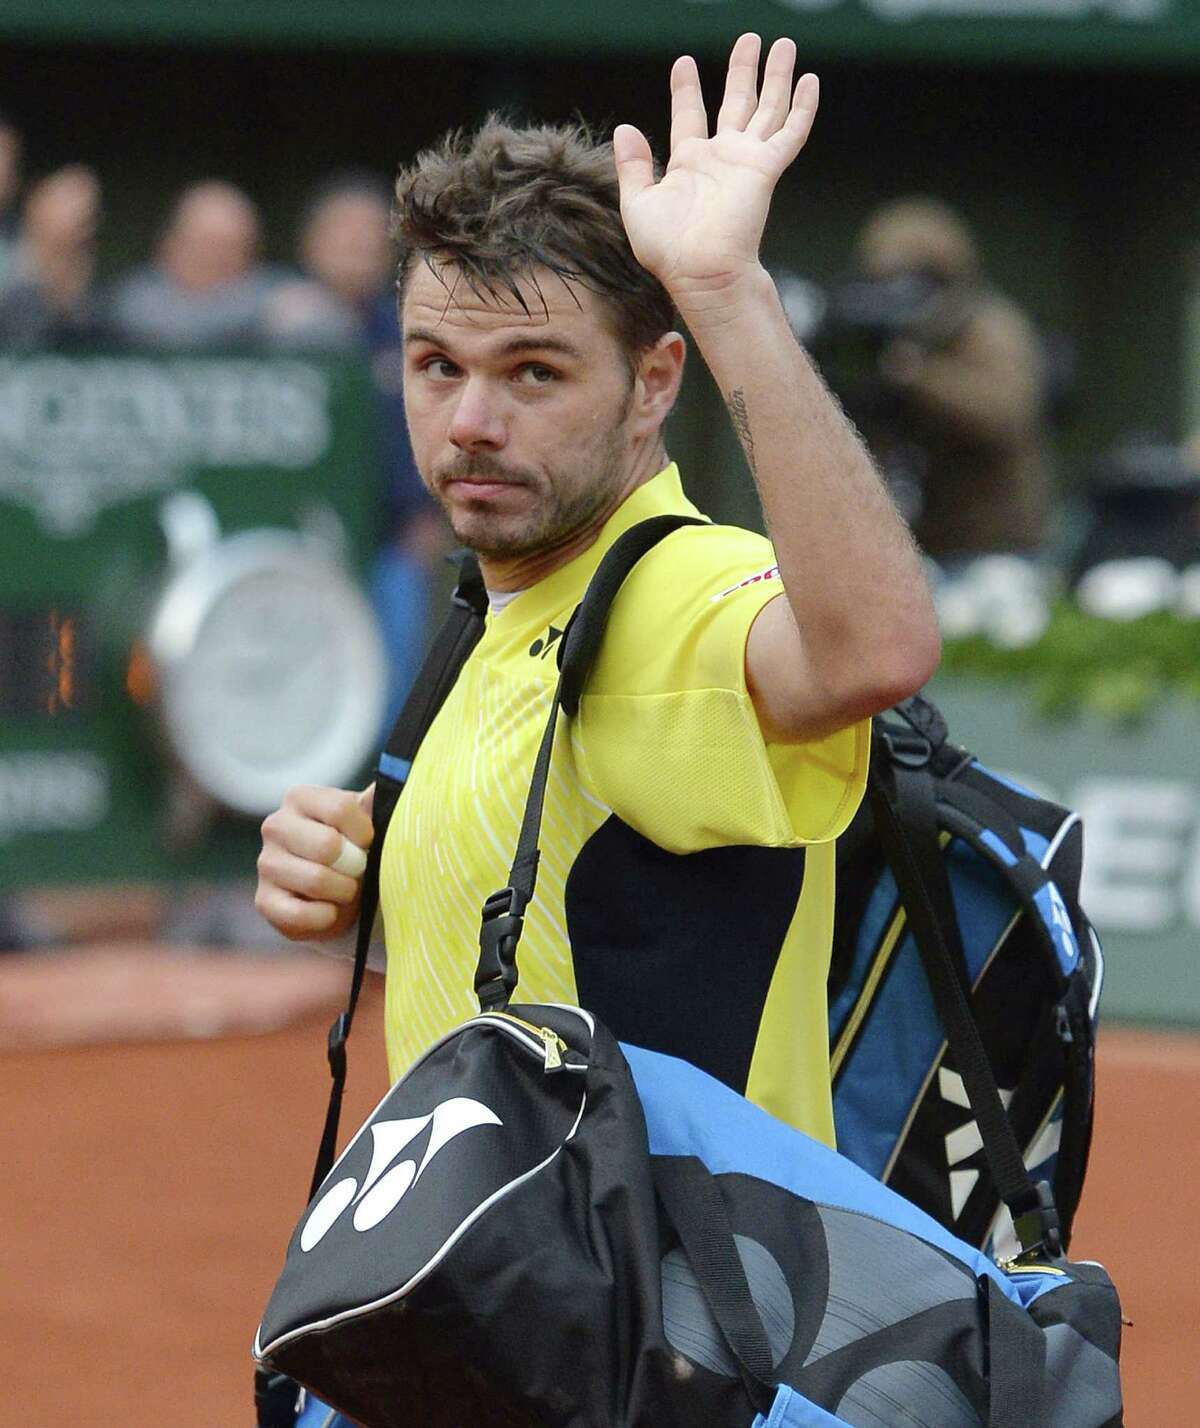 No. 3 Stan Wawrinka bids adieu to the Roland Garros crowd after losing to Guillermo Garcia-Lopez in the first round.